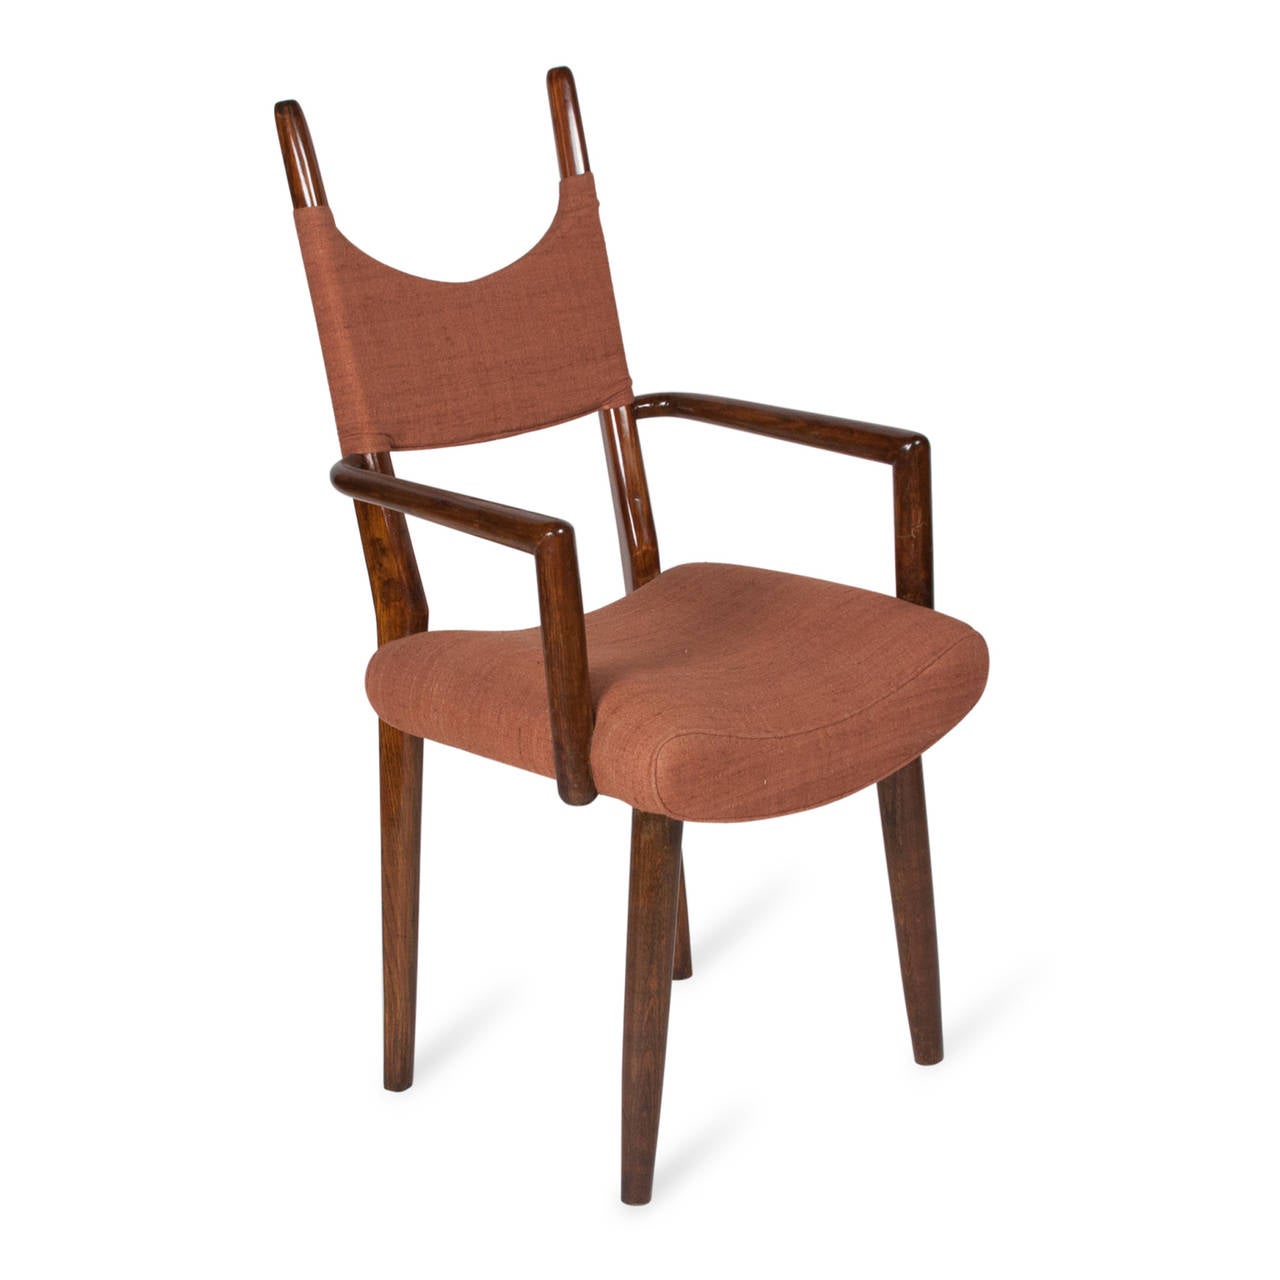 Pair of Palissandre Dining Chairs by Jean Royere, French, 1950s In Excellent Condition For Sale In Hoboken, NJ